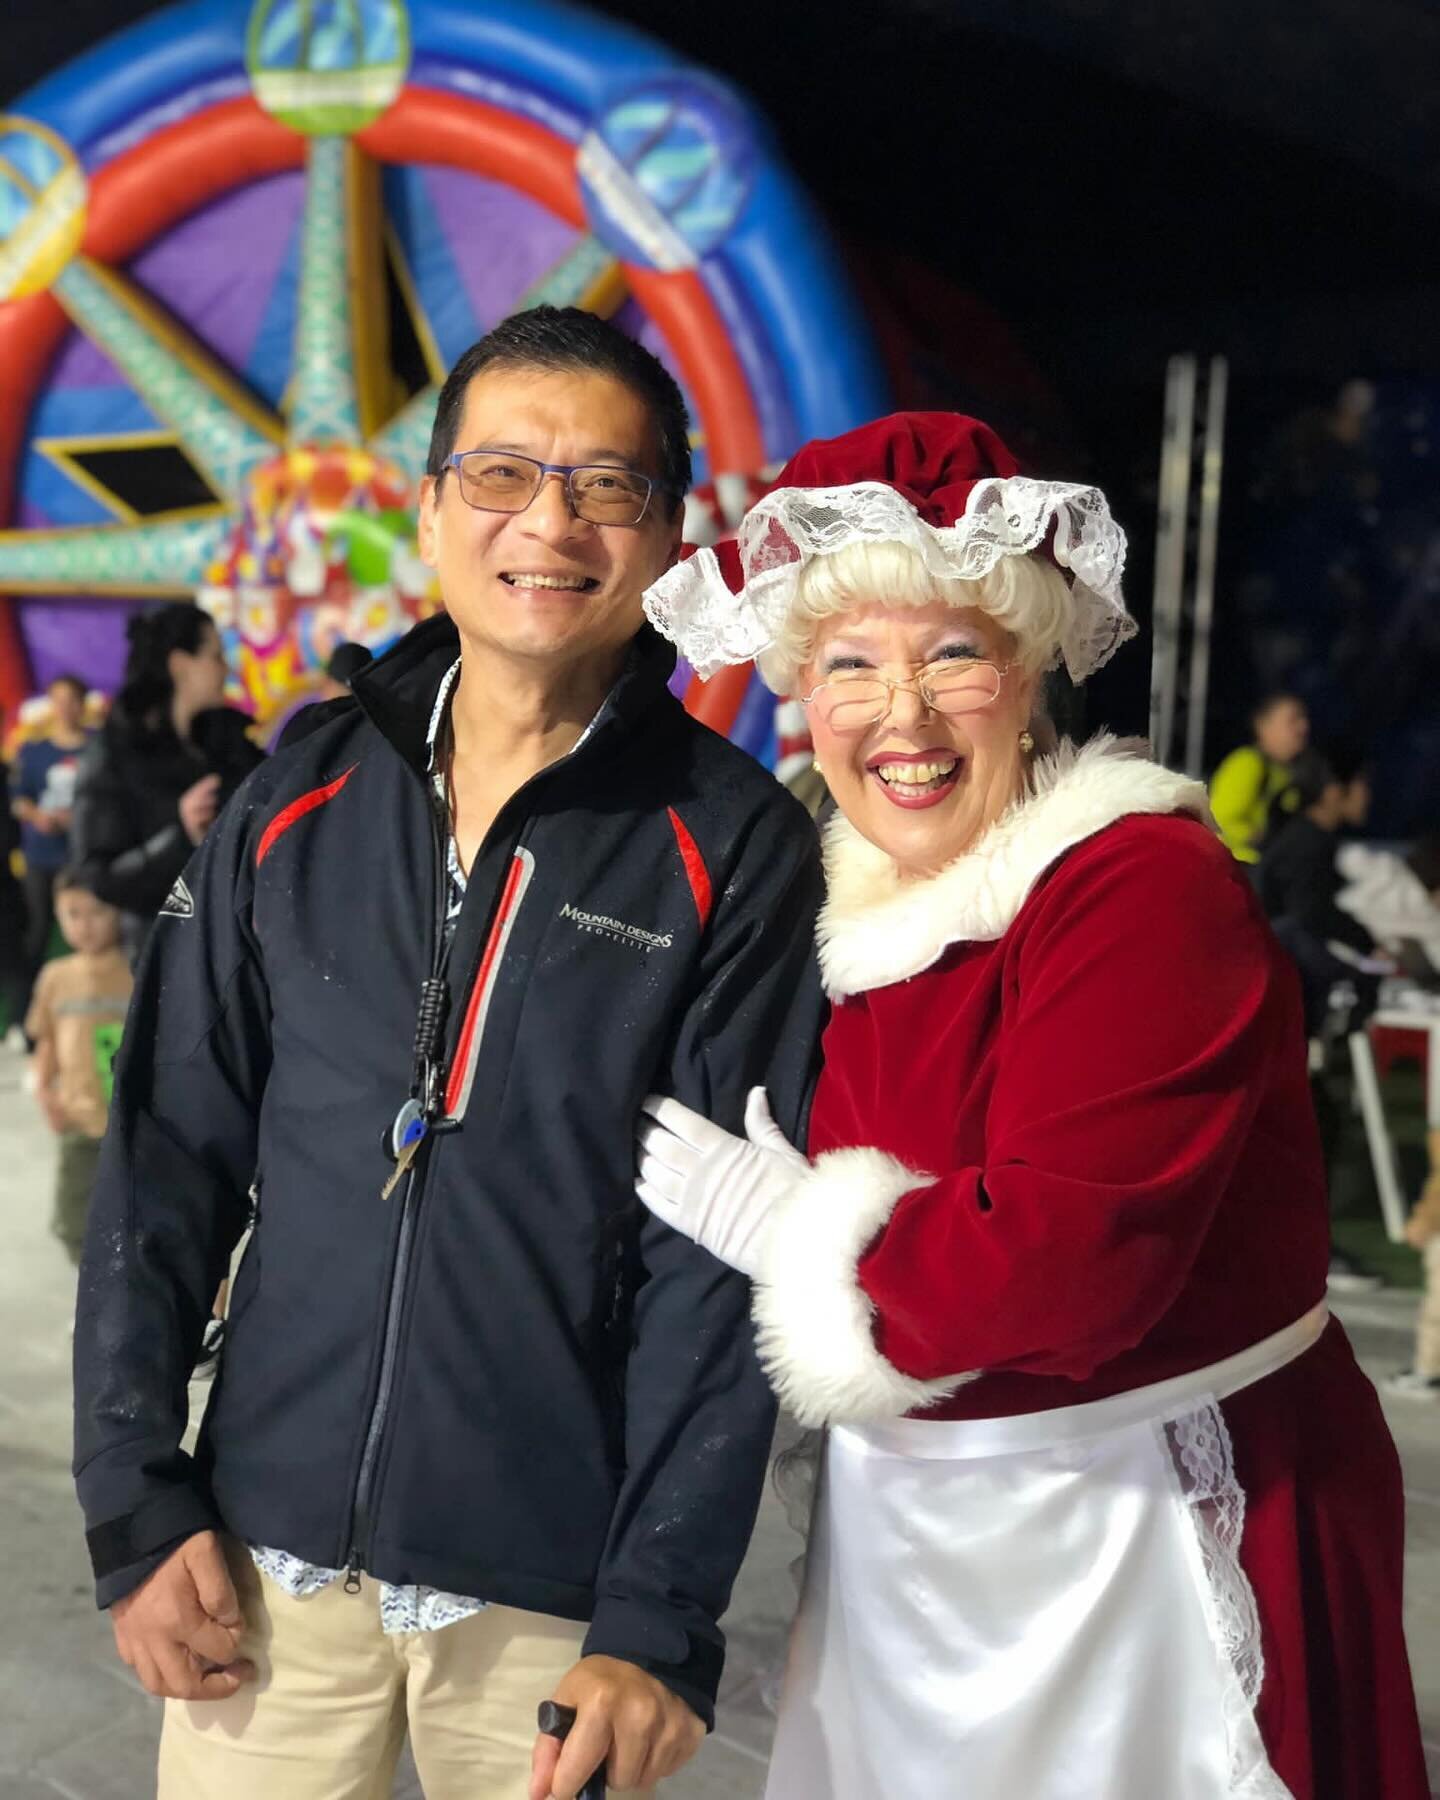 It&rsquo;s the most wonderful time of the year 🎅 🎄 🎊 What a fun day out on Saturday at Christmas Under the Big Top!

🏷️ 
#smallbusinessmelbourne #smallbusinessvictoria #ndis #ndissupport #ndisaustralia #ndissupportcoordination #supportcoordinatio